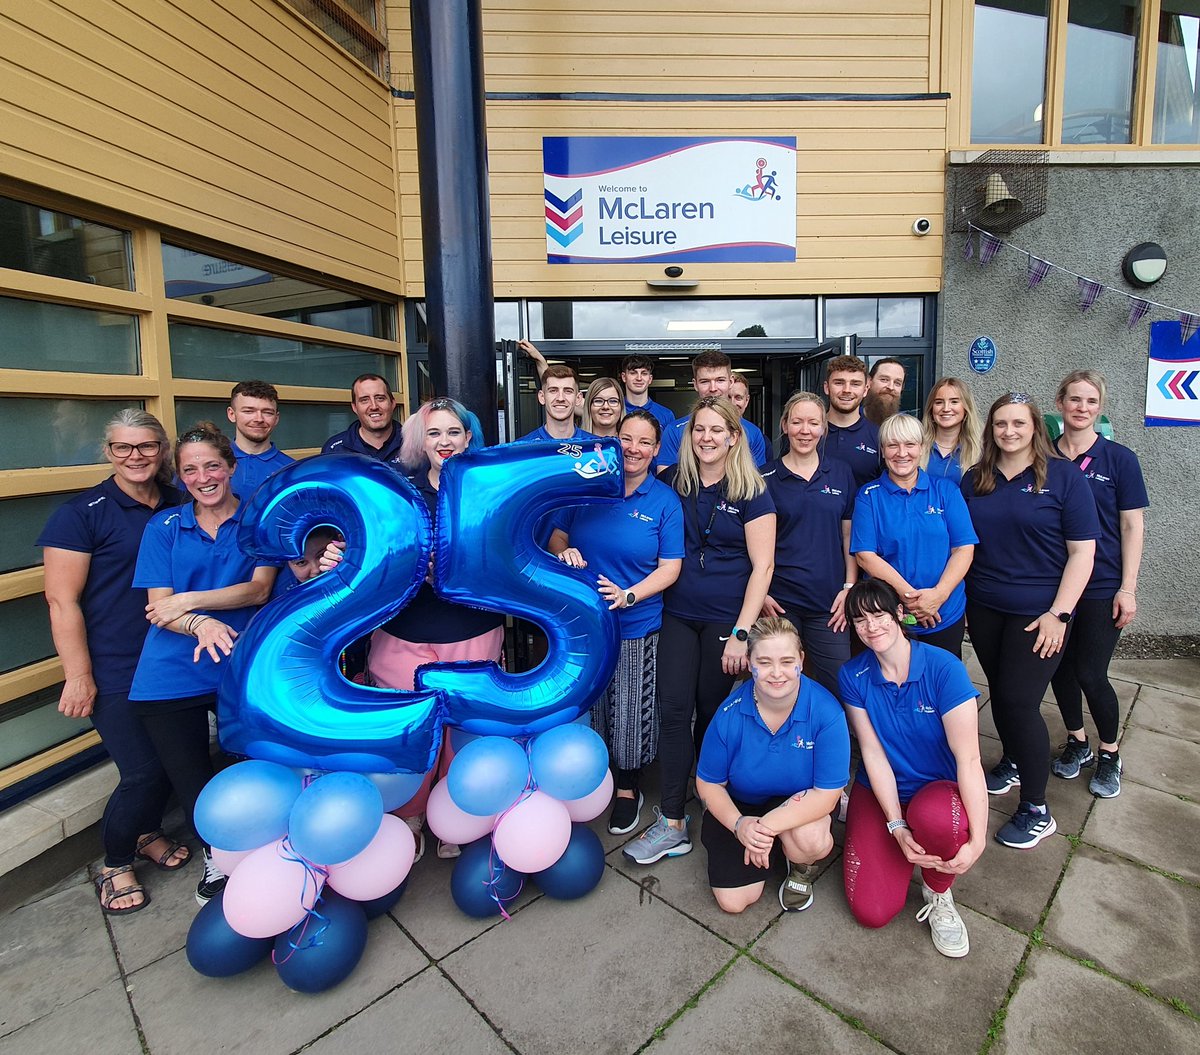 We did it! 🙌 Our Birthday Bash was an incredible success, celebrating 25 amazing years of community togetherness and well-being. Here's some of our dedicated team after a busy day partying with you all. We hope you had as much fun as we did! Here's to the next 25. 🥳🎂🎈